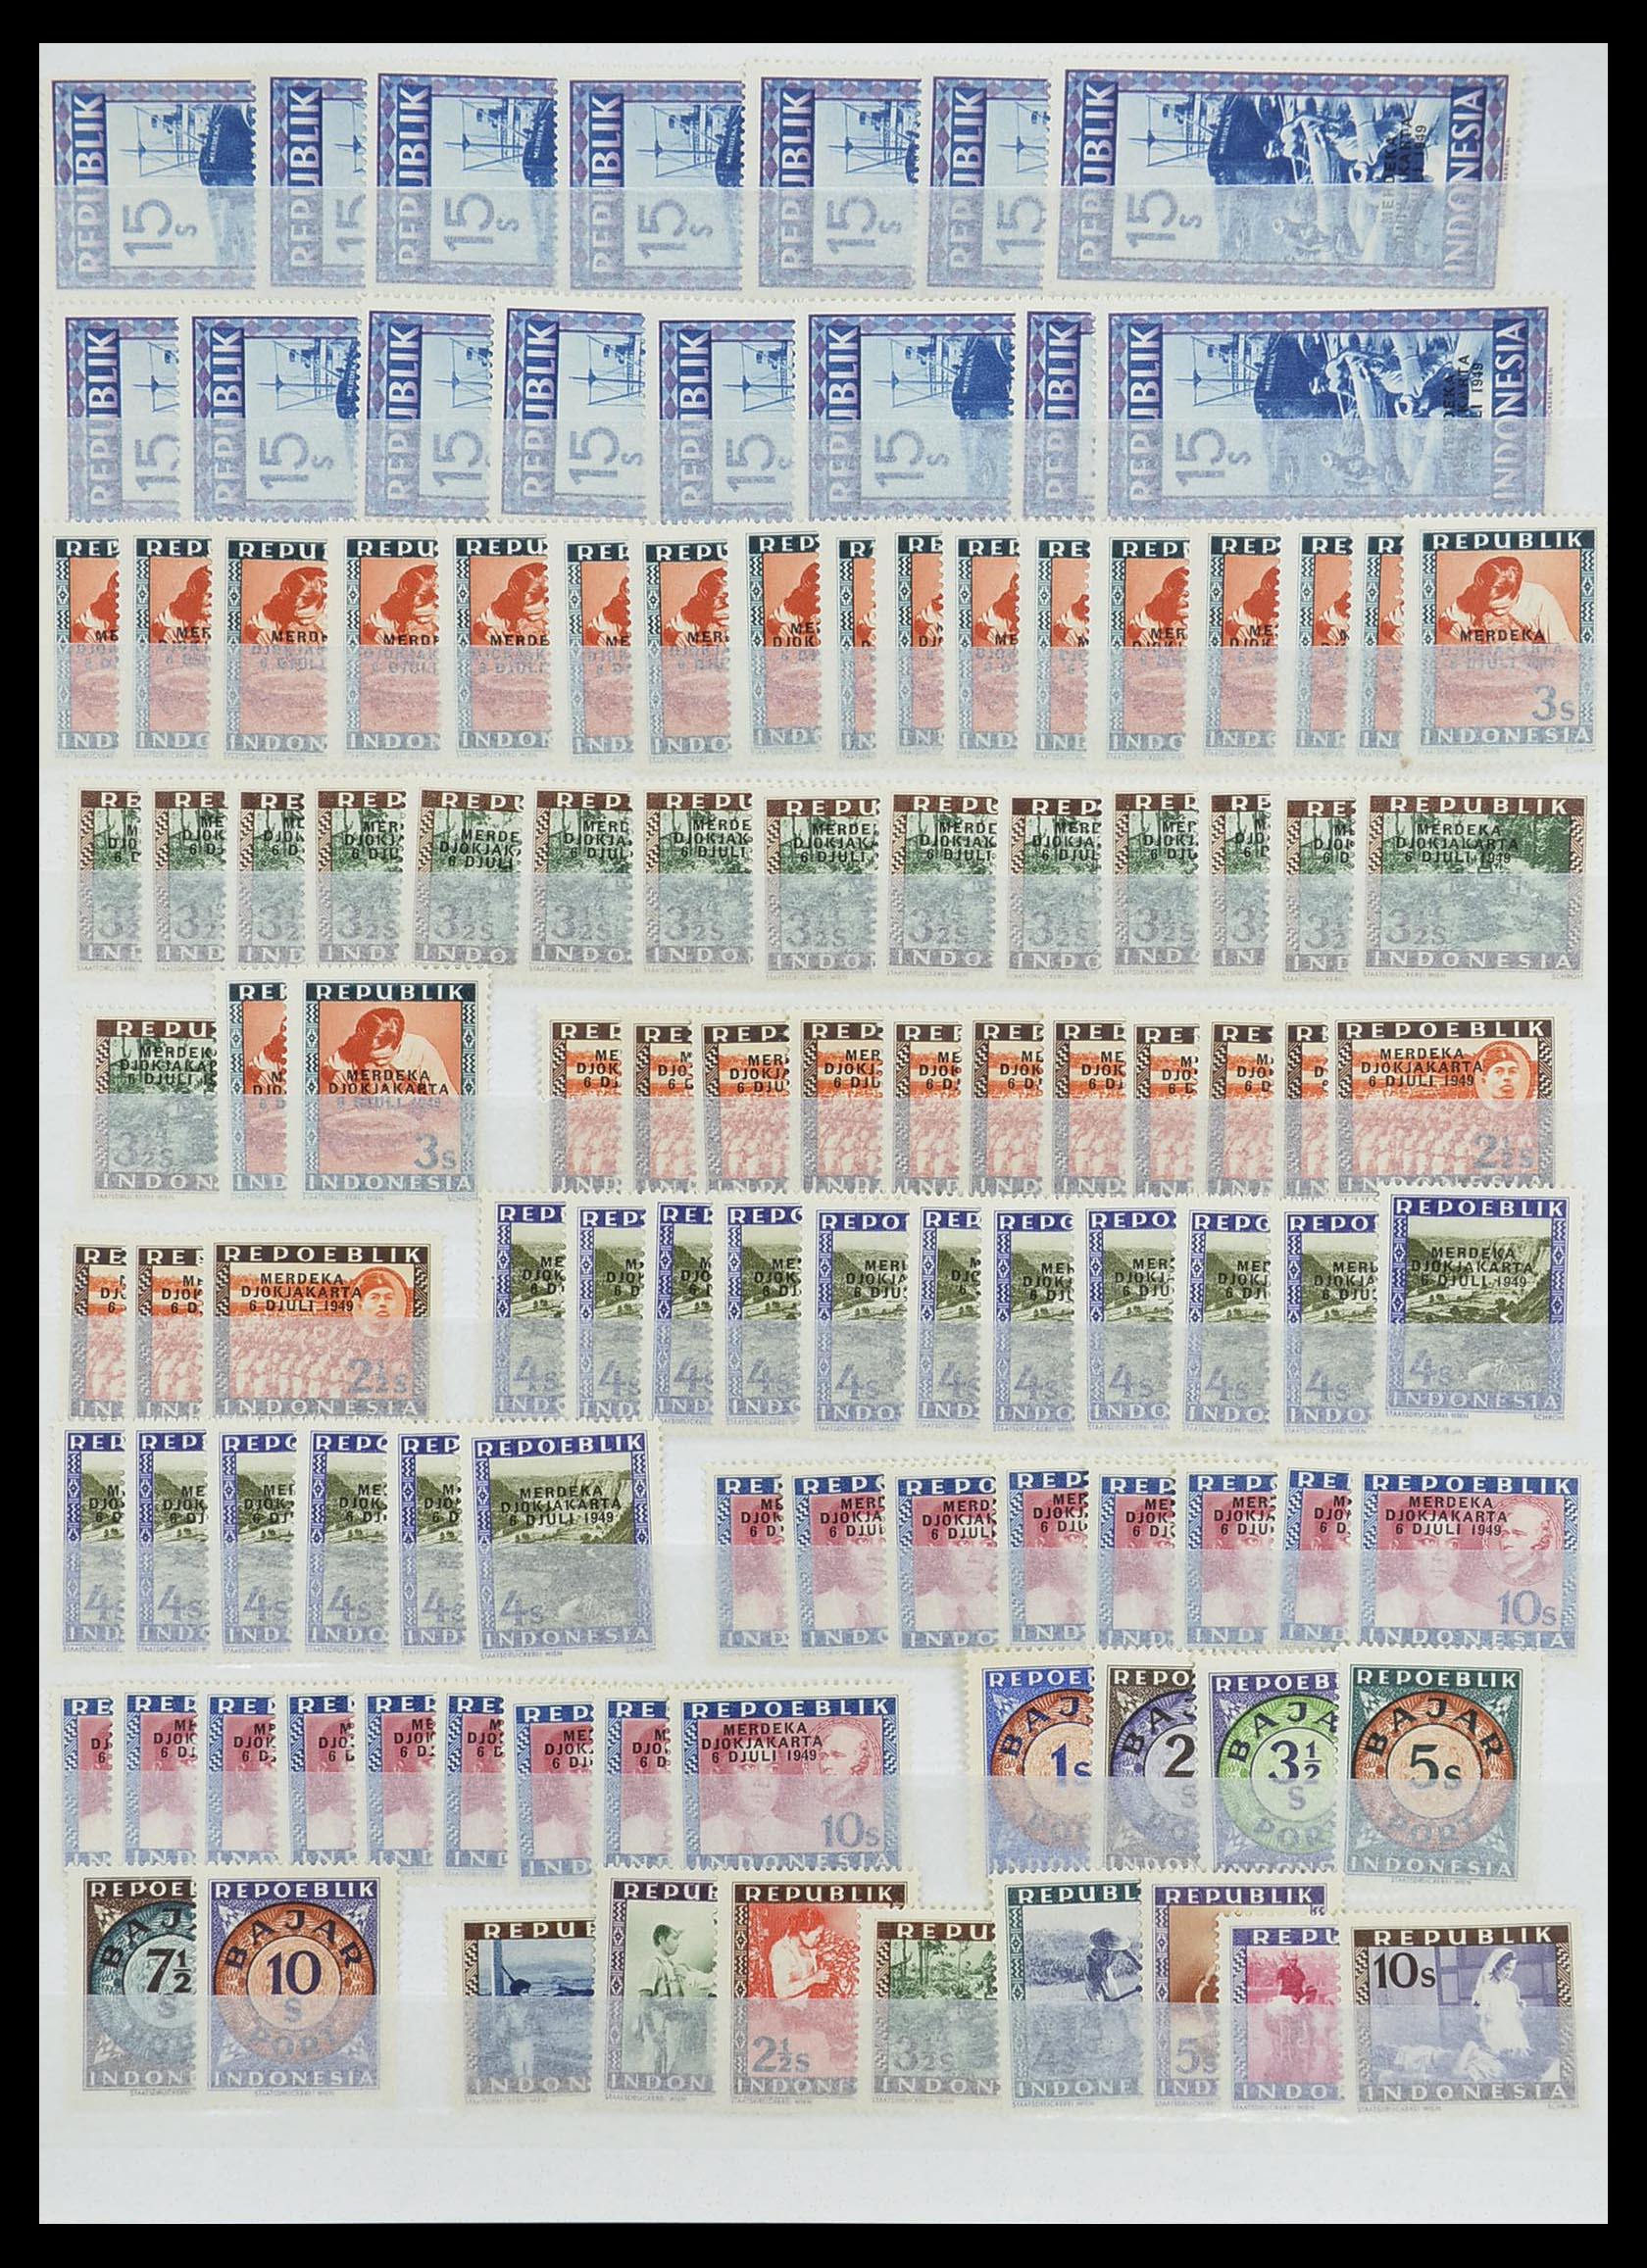 33489 008 - Stamp collection 33489 Japanese occupation Dutch east Indies and interim